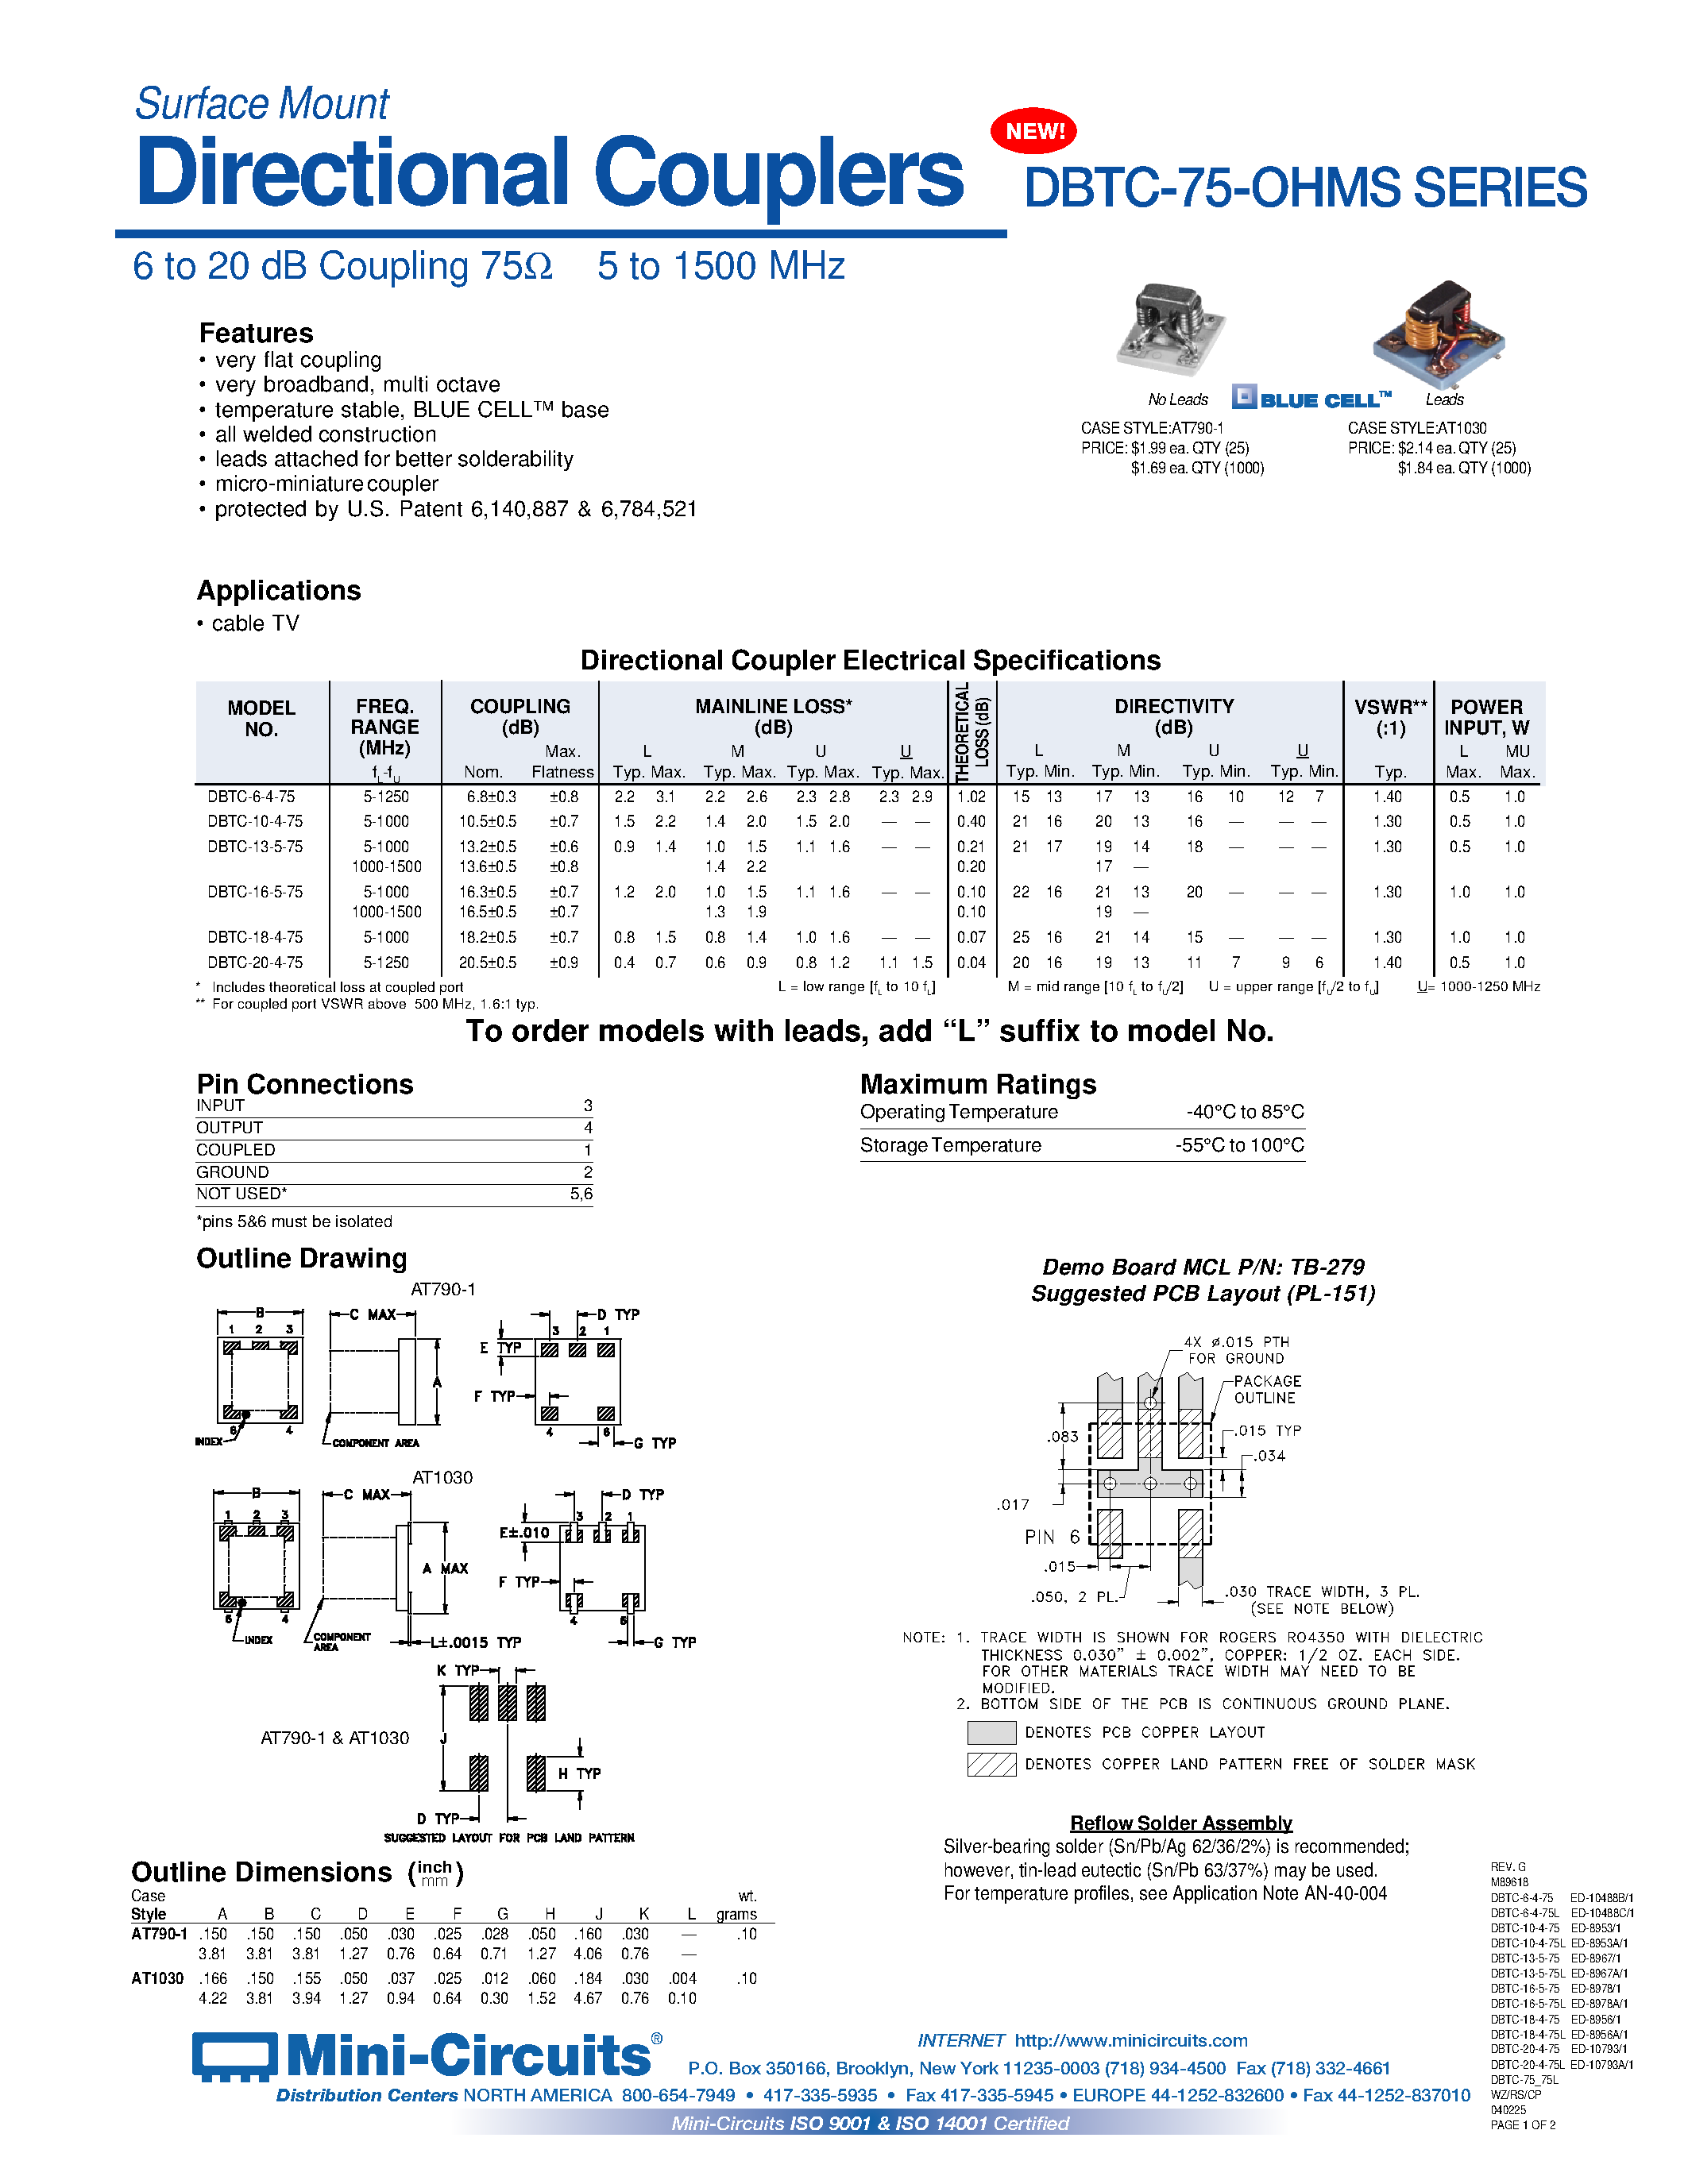 Datasheet DBTC-6-4-75 - Surface Mount Directional Couplers page 1